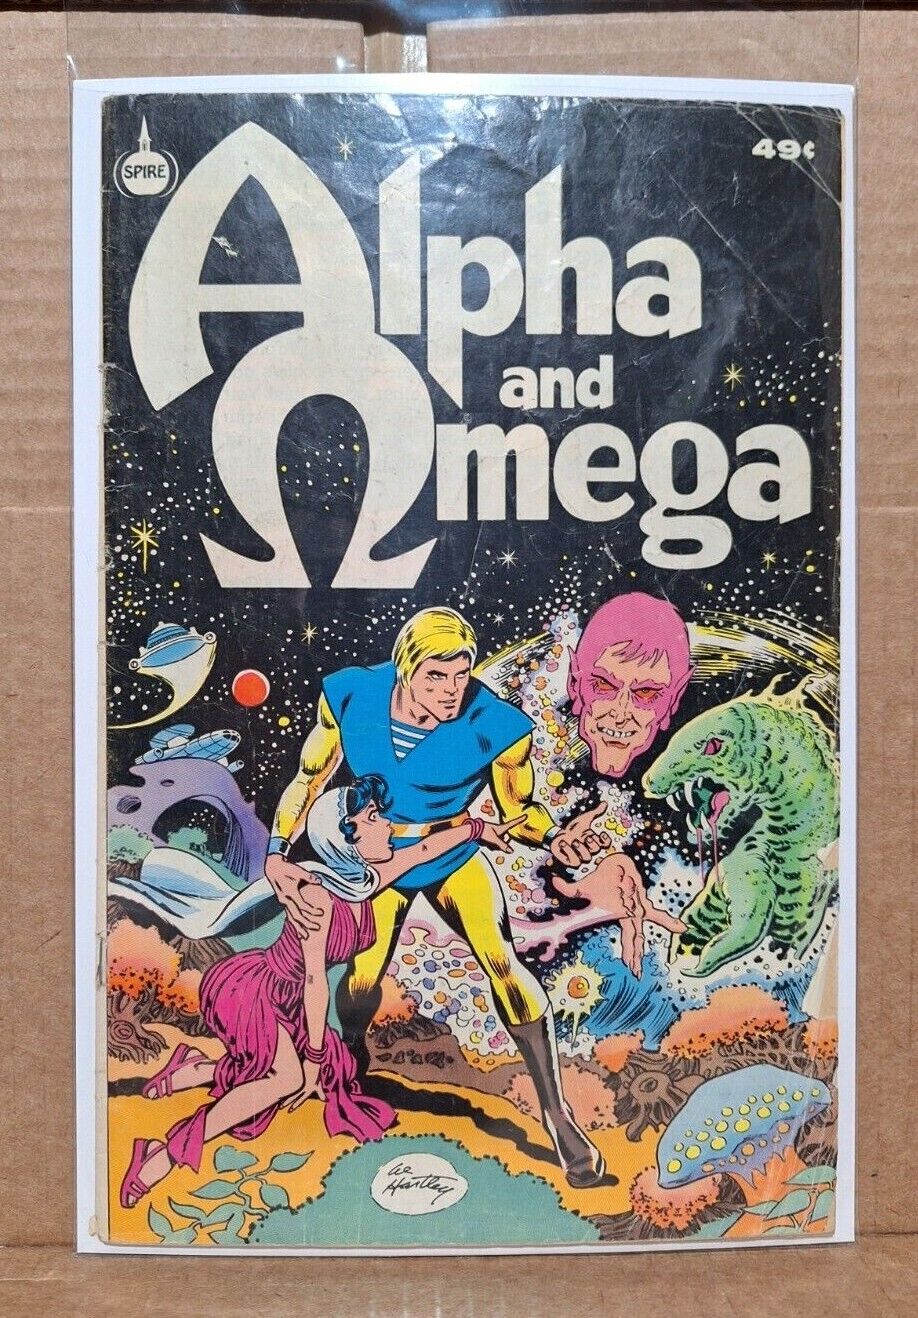 Comic Books (1970s-2000s) - Flat Shipping, Buy 2+ For Discounts